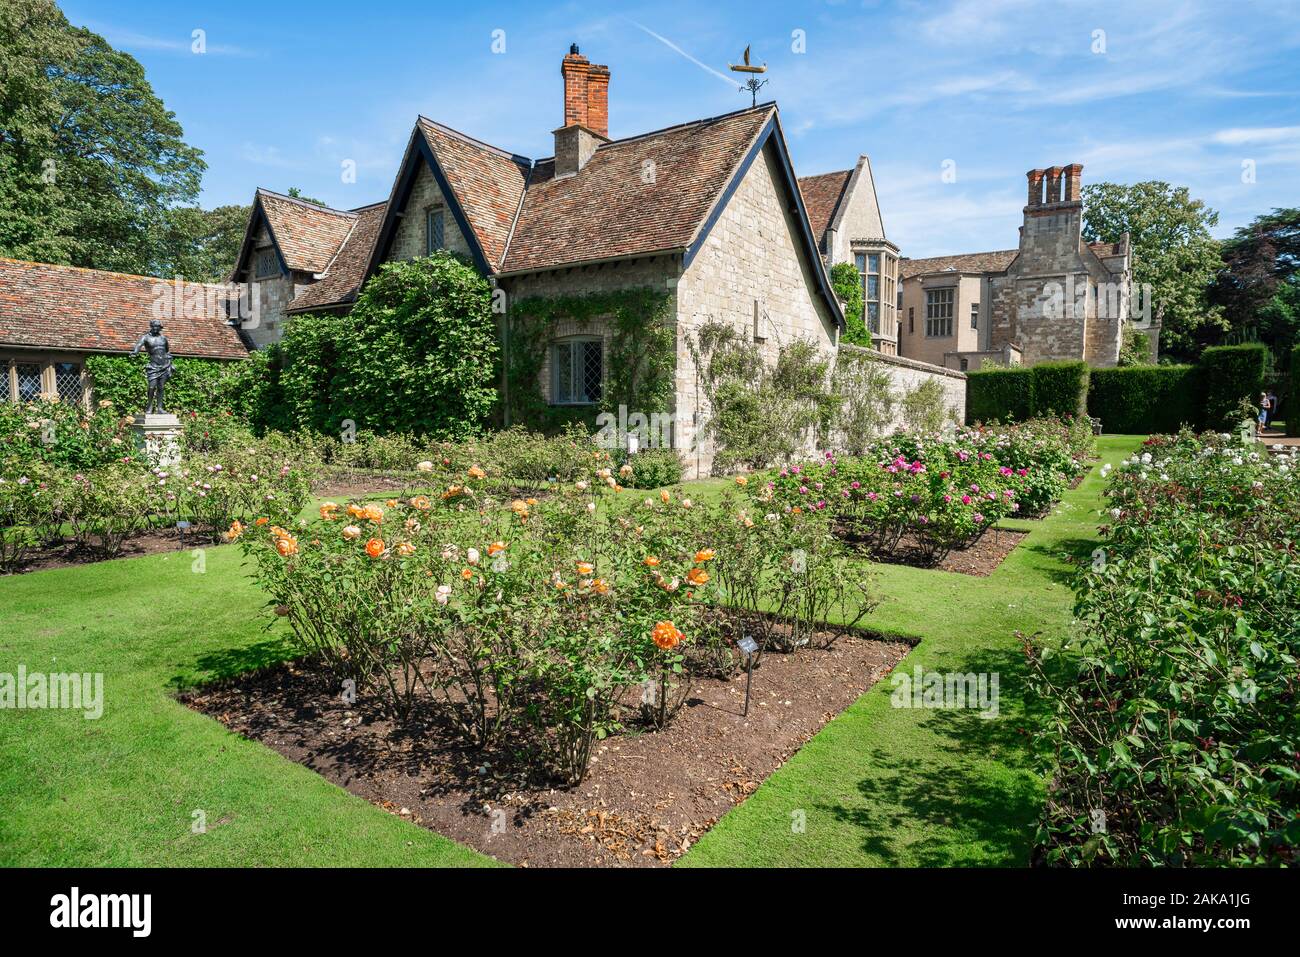 Anglesey Abbey, view of the rose garden of Anglesey Abbey, a 17th century country house in the village of Lode, Cambridgeshire, England, UK. Stock Photo